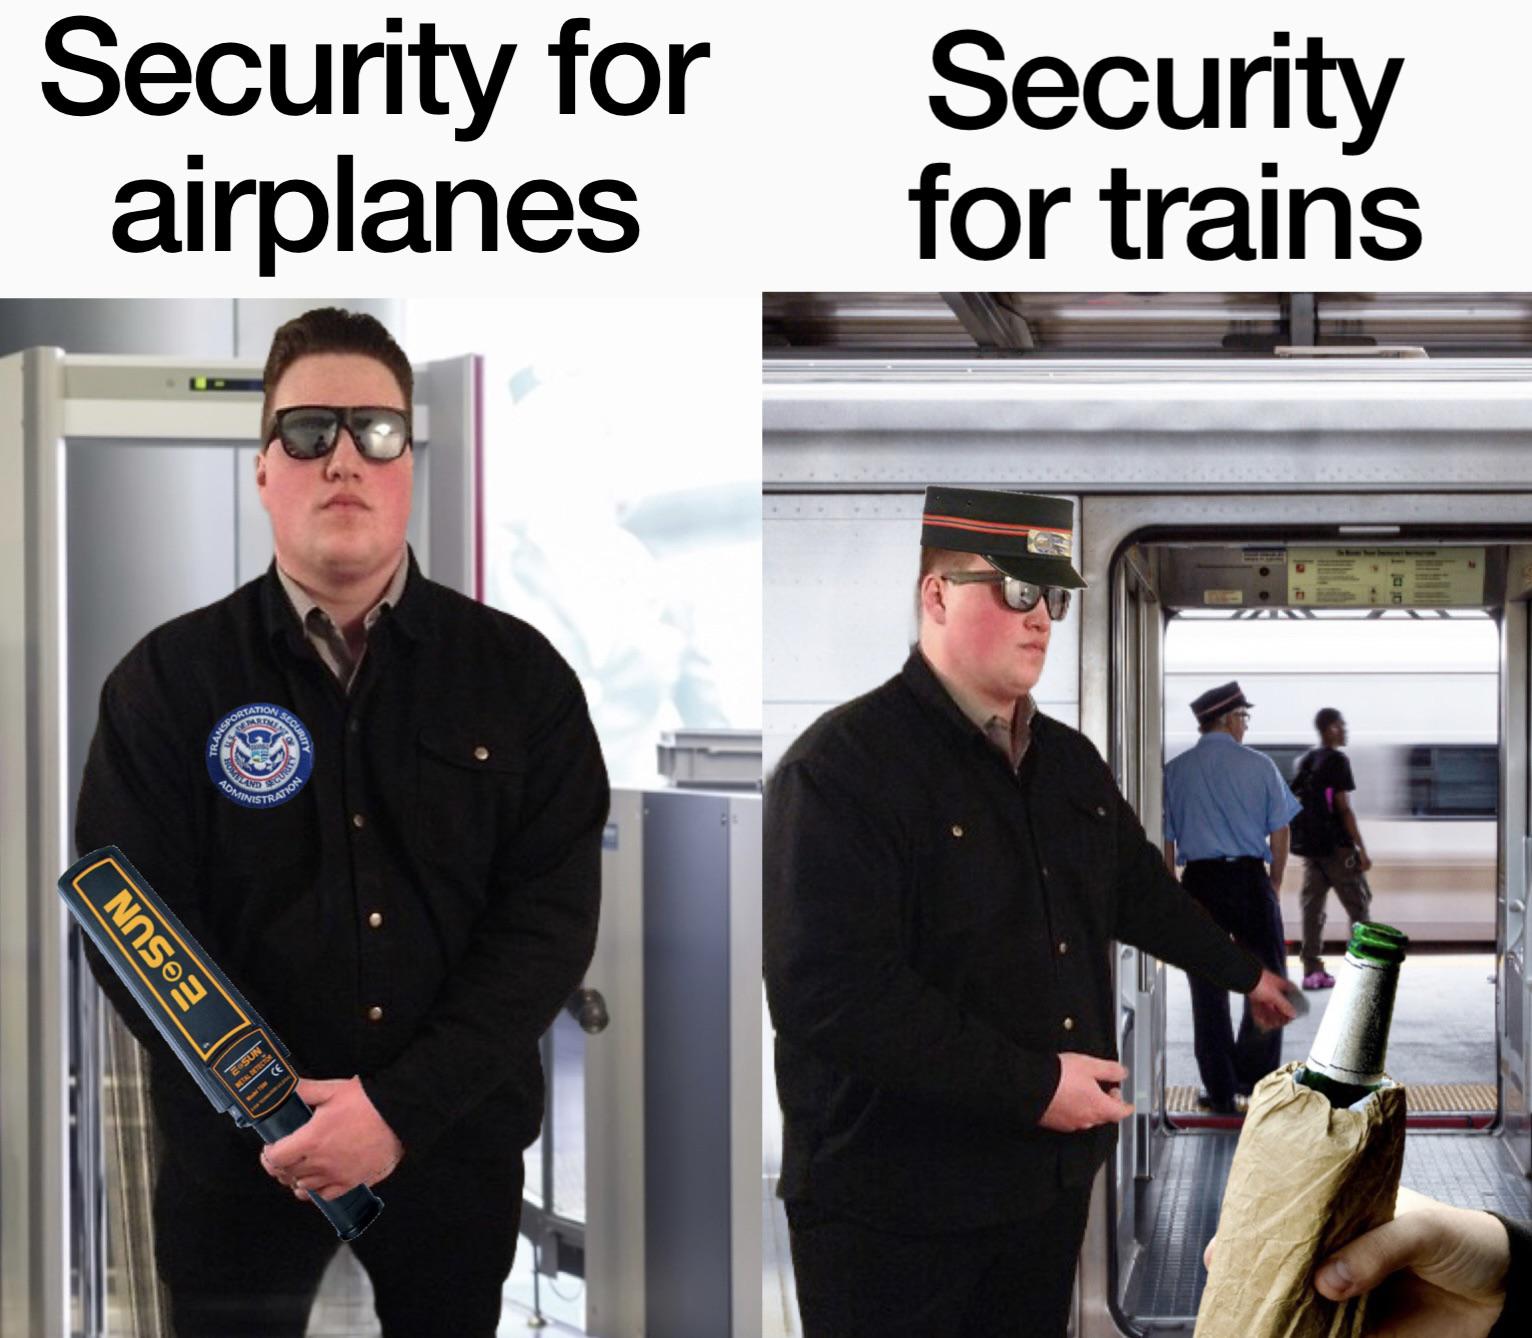 first security bank - Security for airplanes Security for trains Aren Kanspo Security Administri Curs Tration De Sun